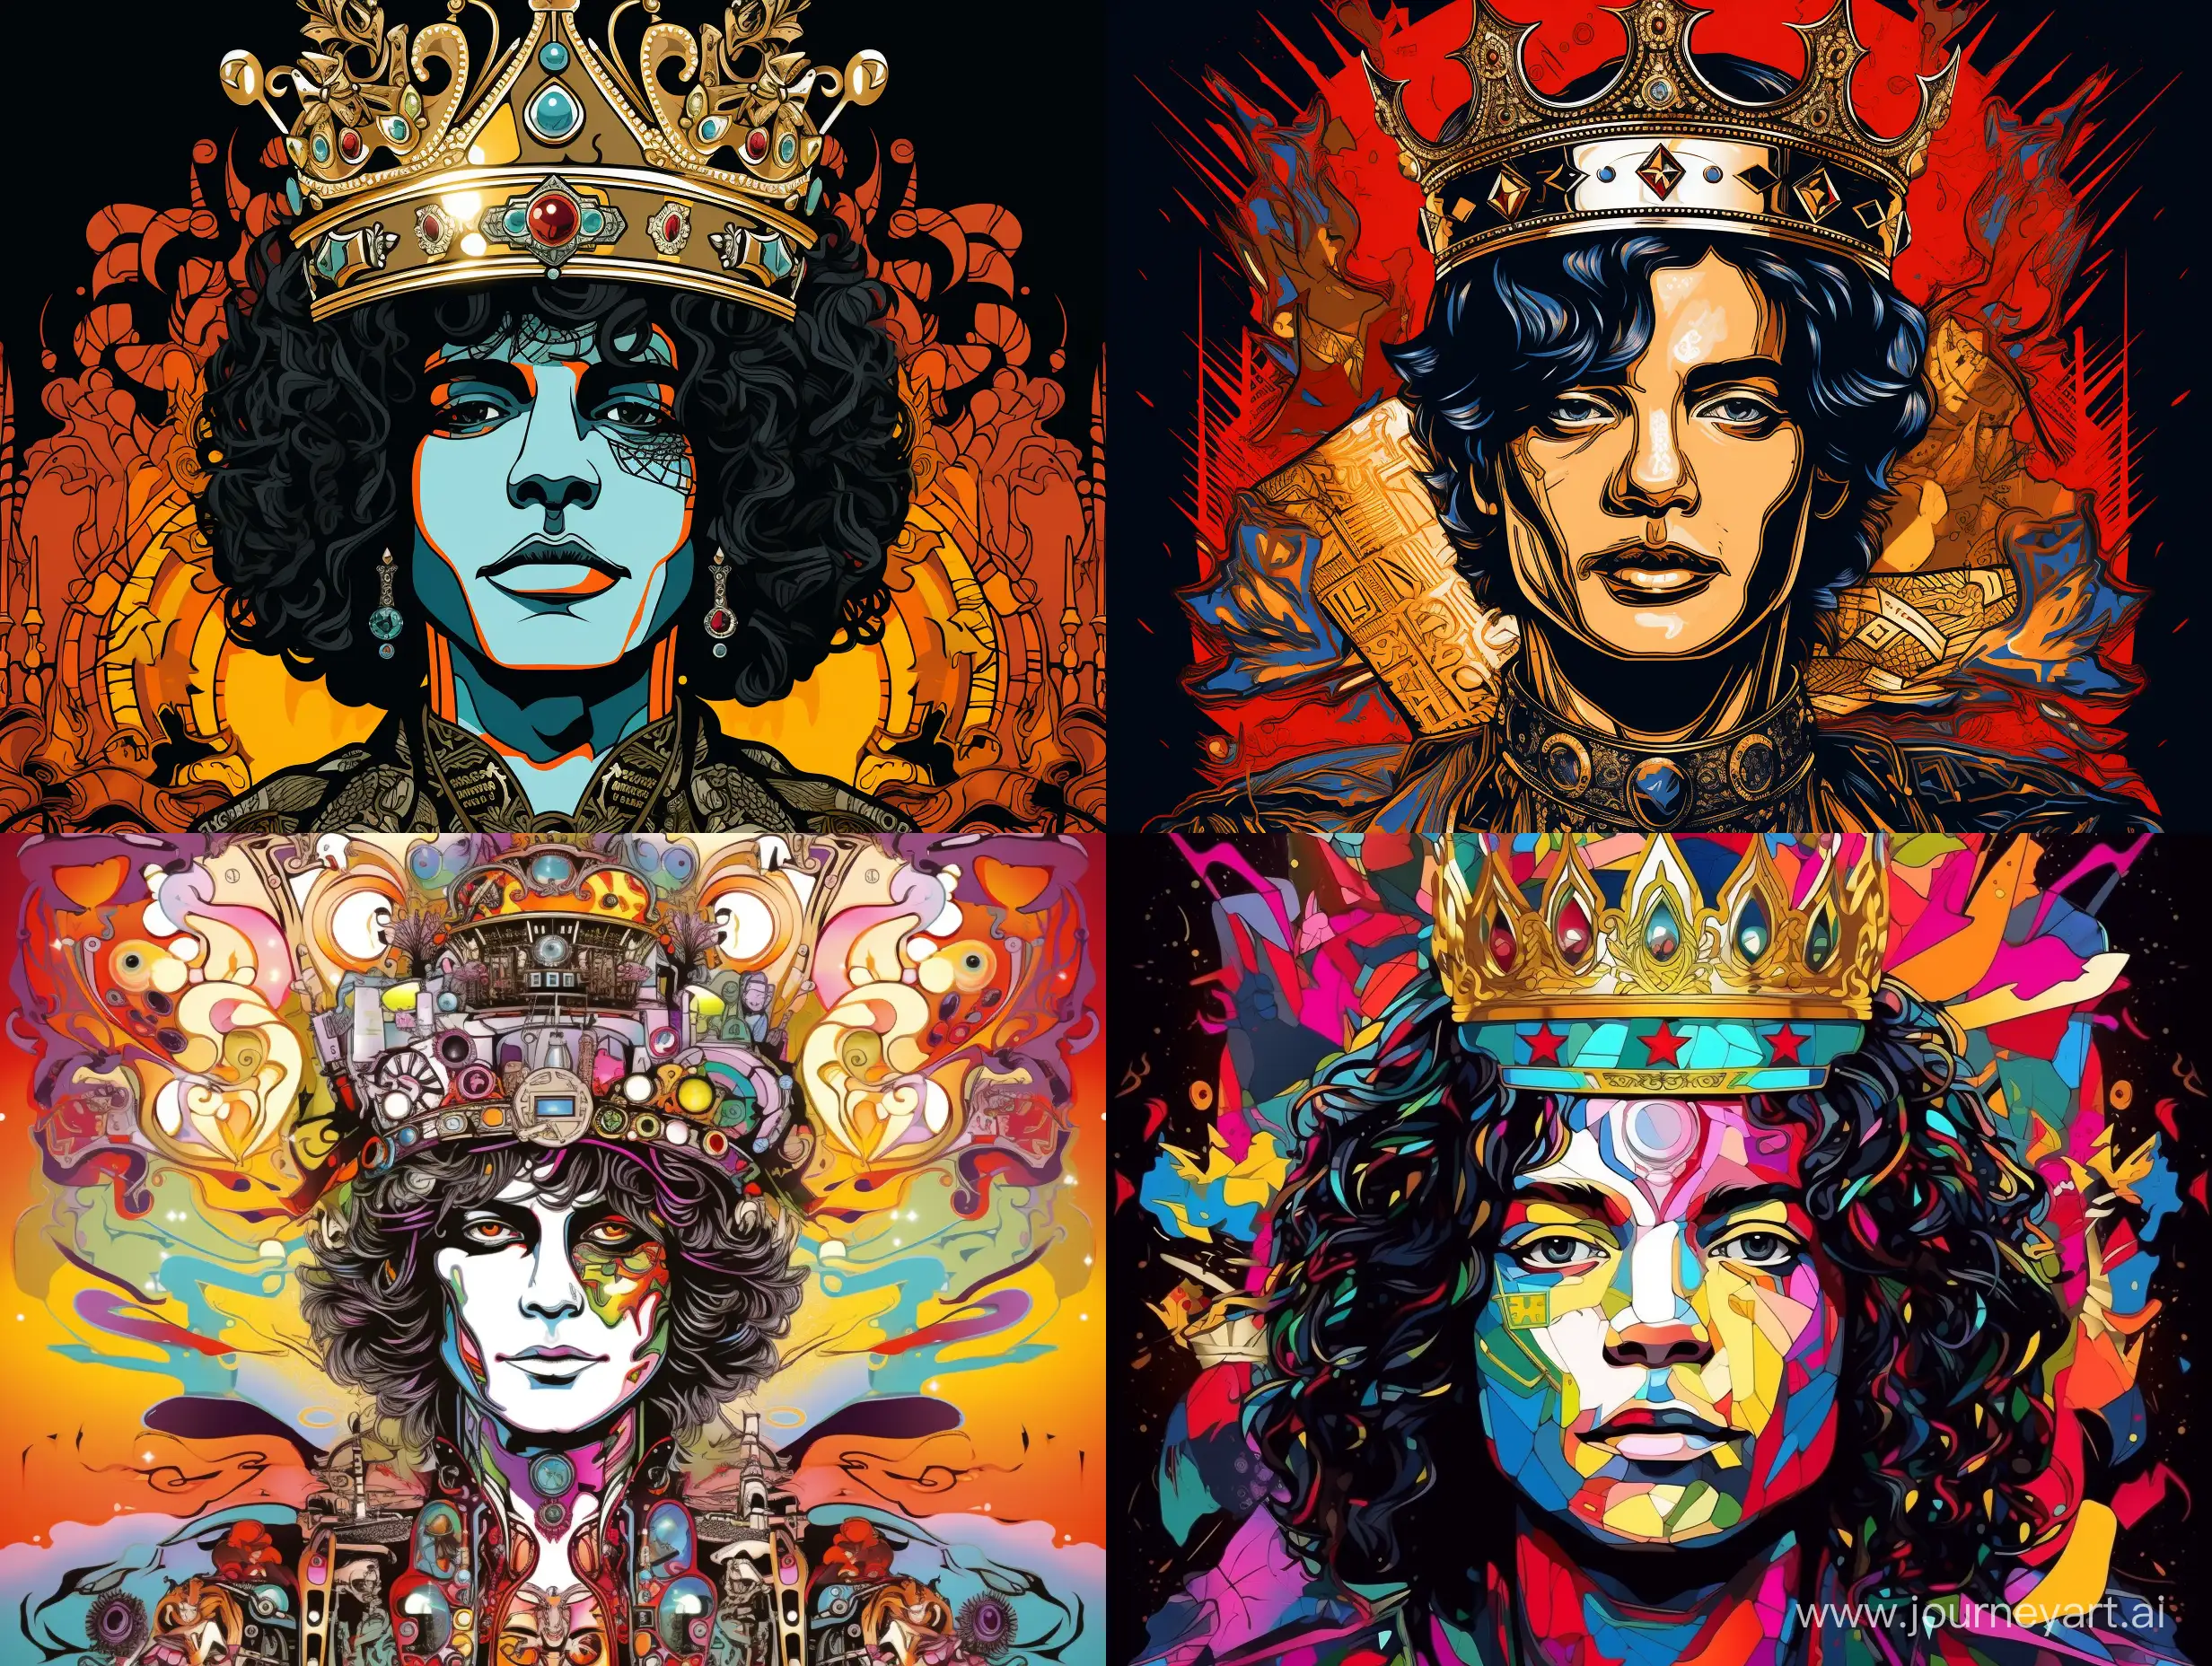 Waist portrait of Michael Jackson, with a crown on his head, mature years, handsome, with a small nose, against a background of musical symbols, many details, complex colors, caricature, pop art style